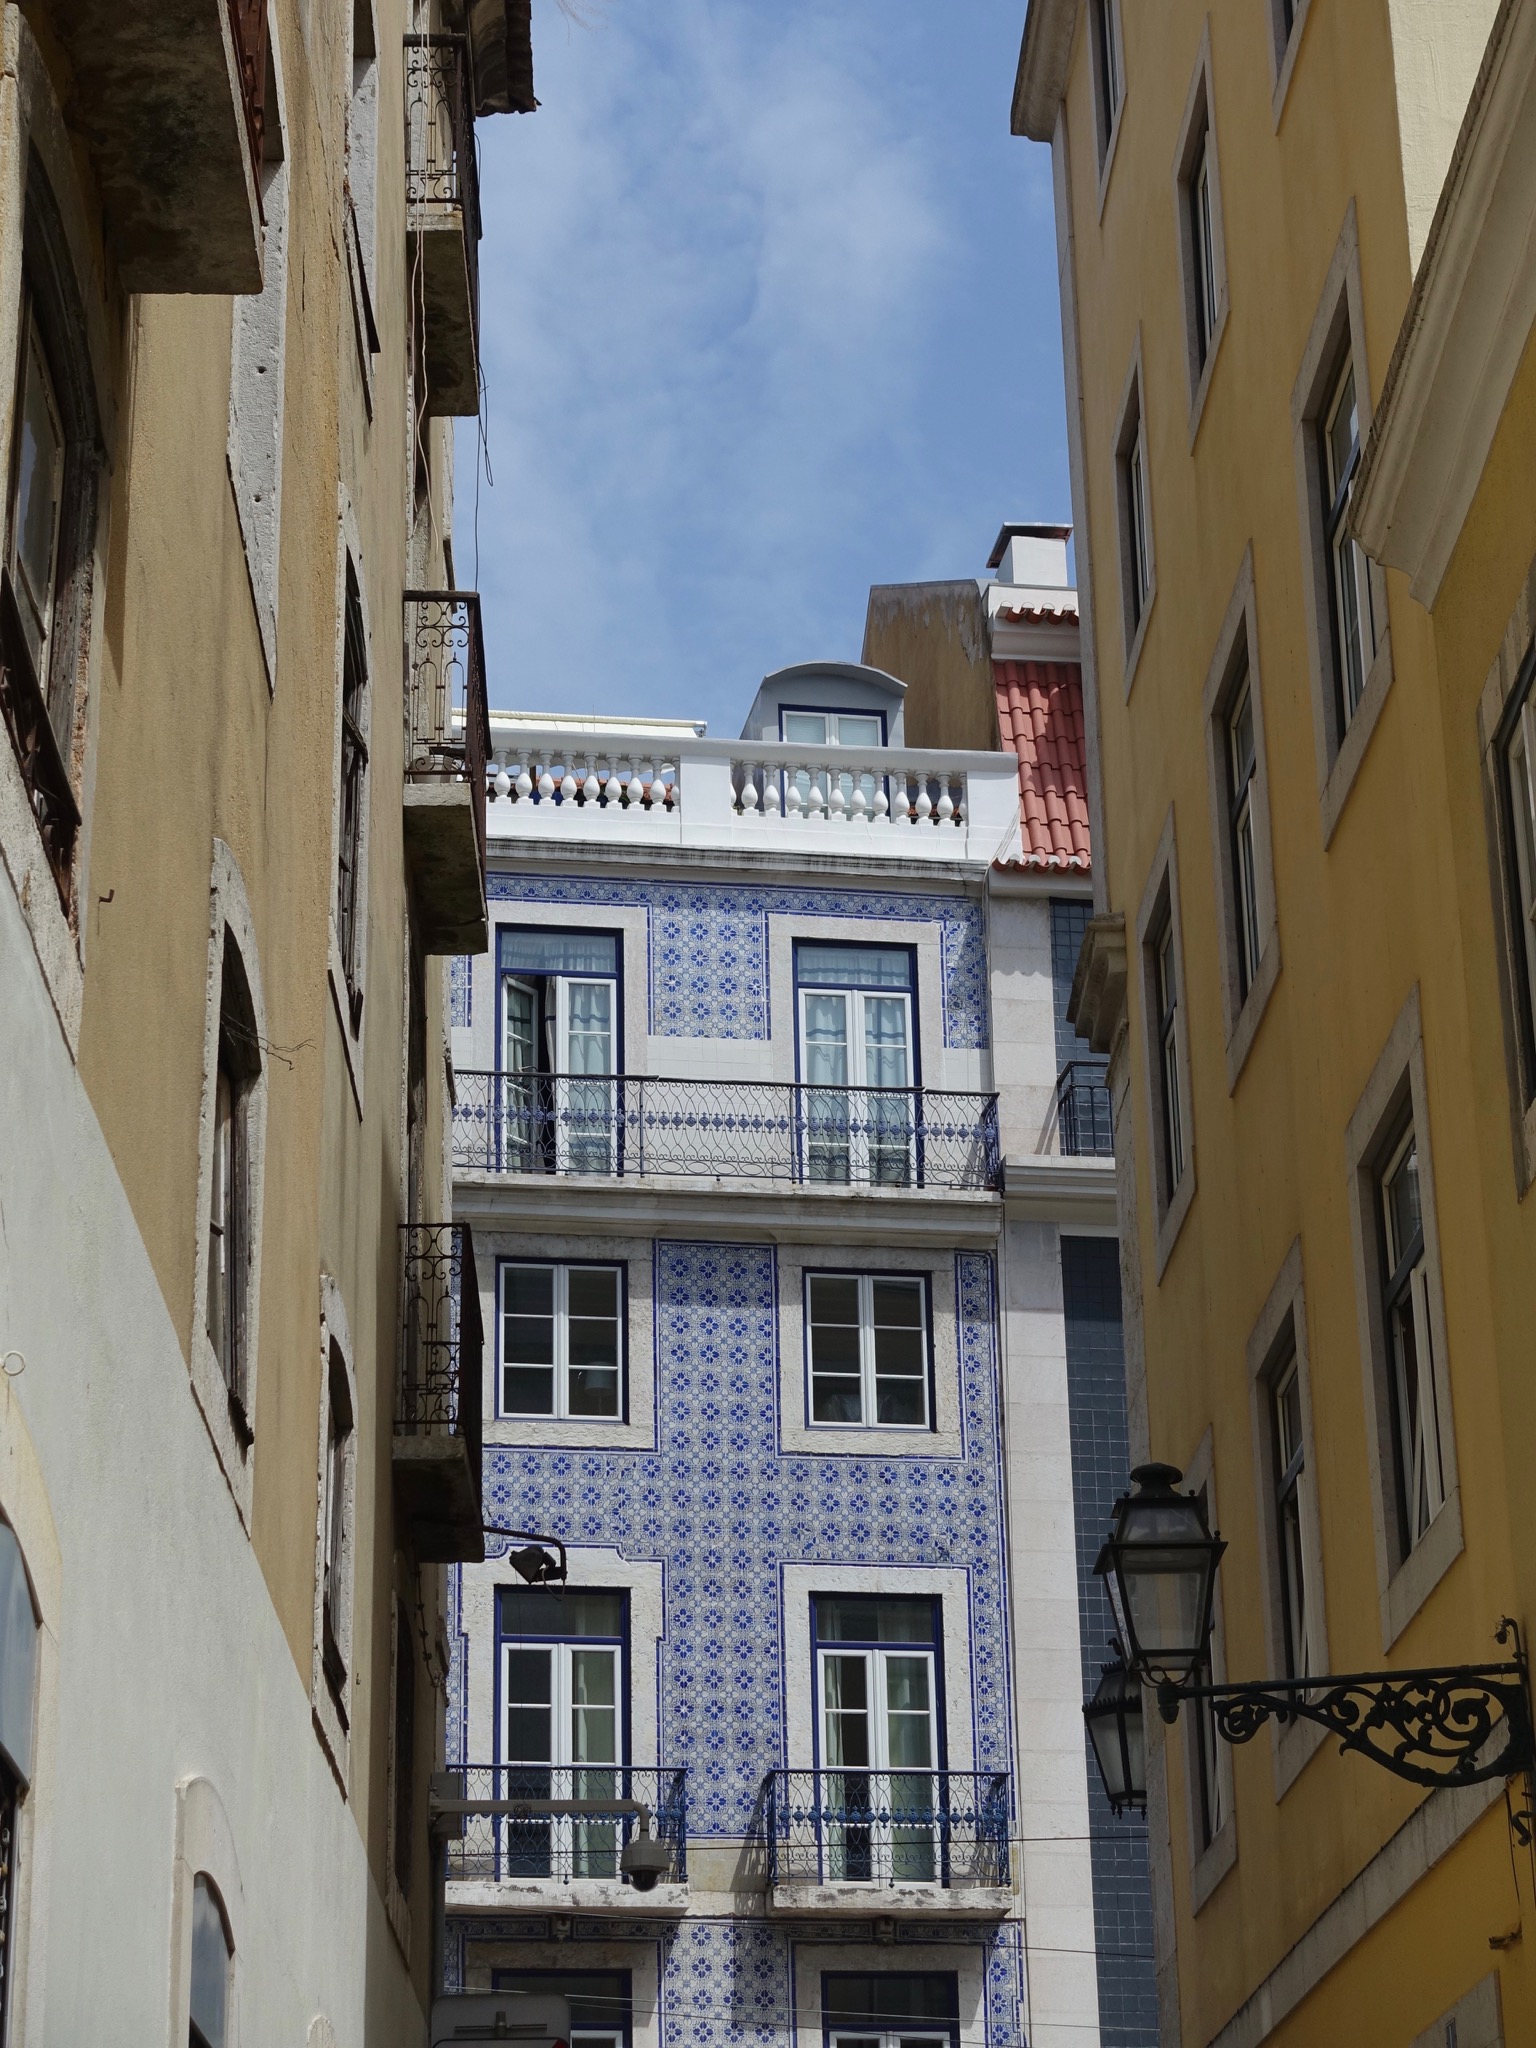 Photo 70 of 86 from the album Highlights Lisbon 2015.